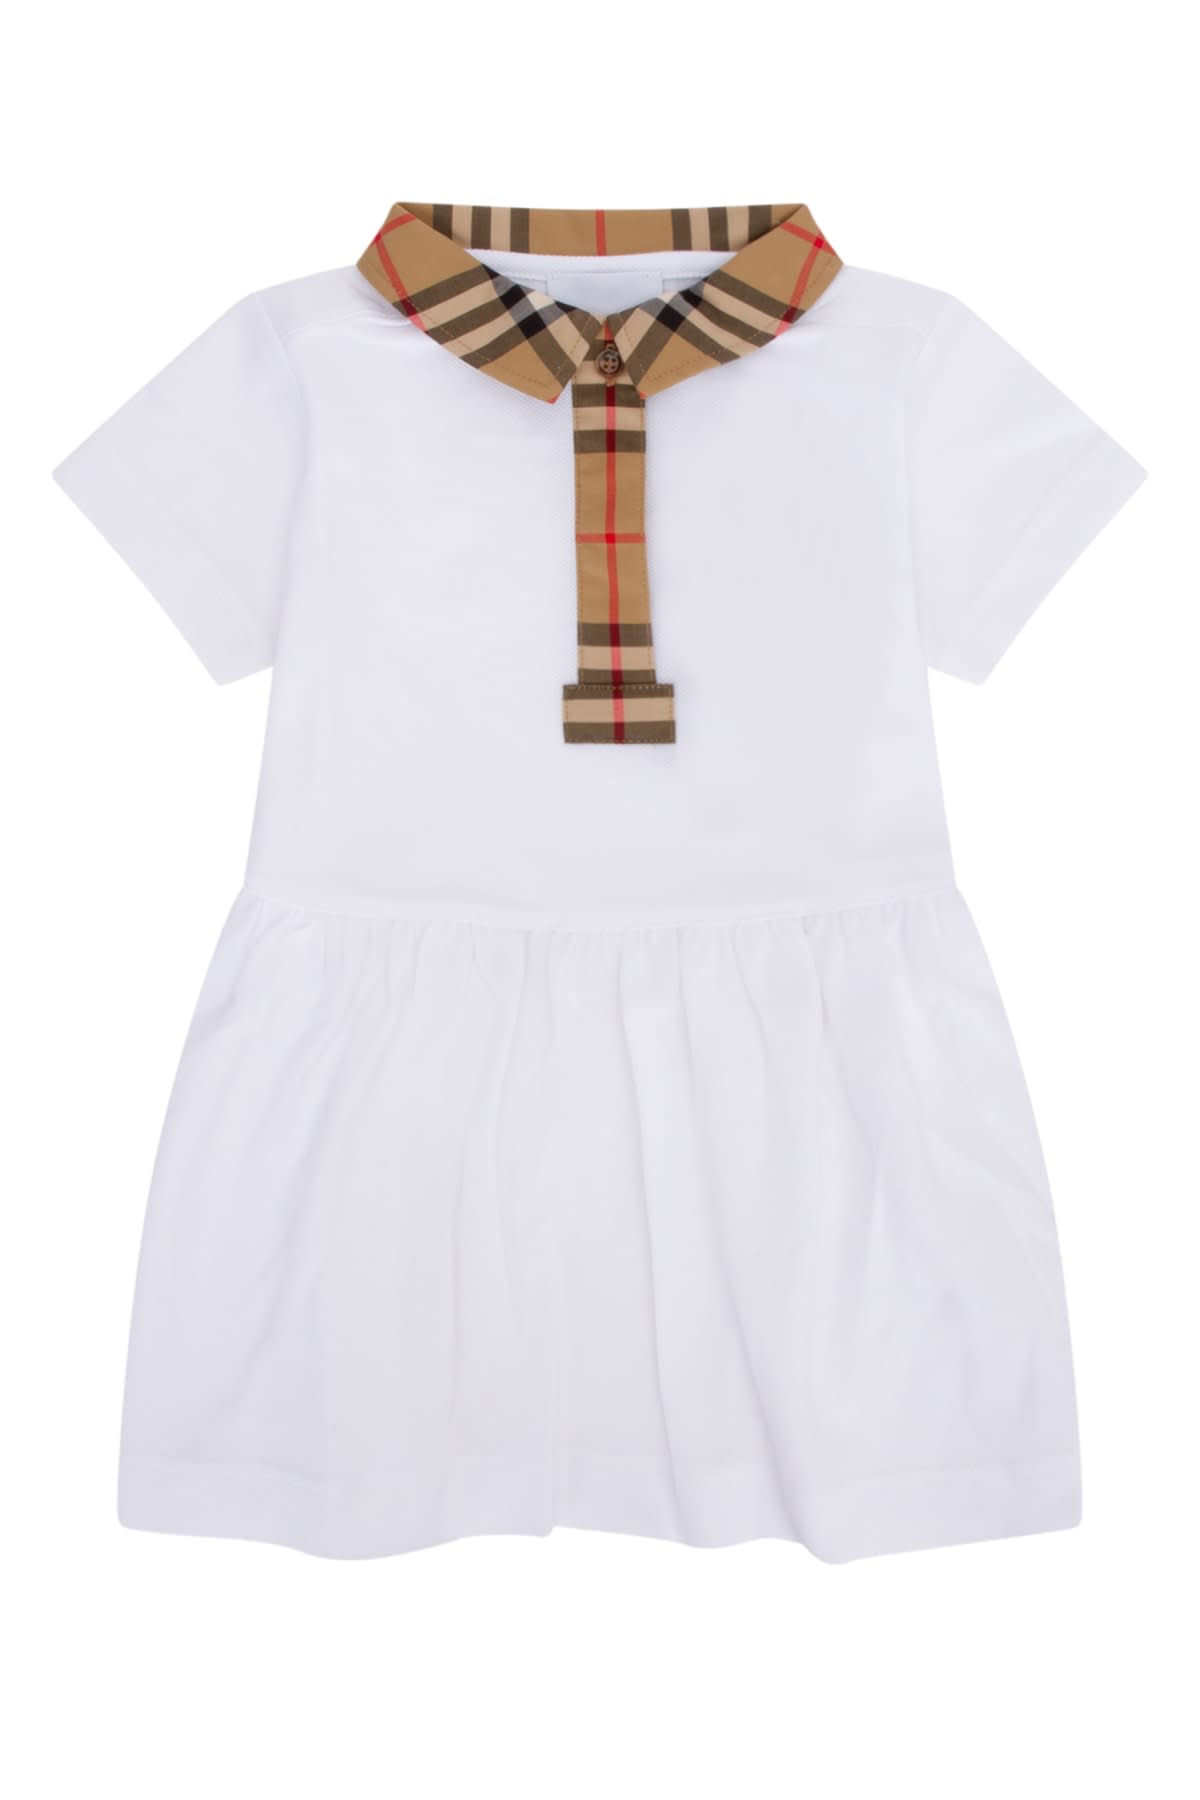 Burberry Babies' Abito In A1464